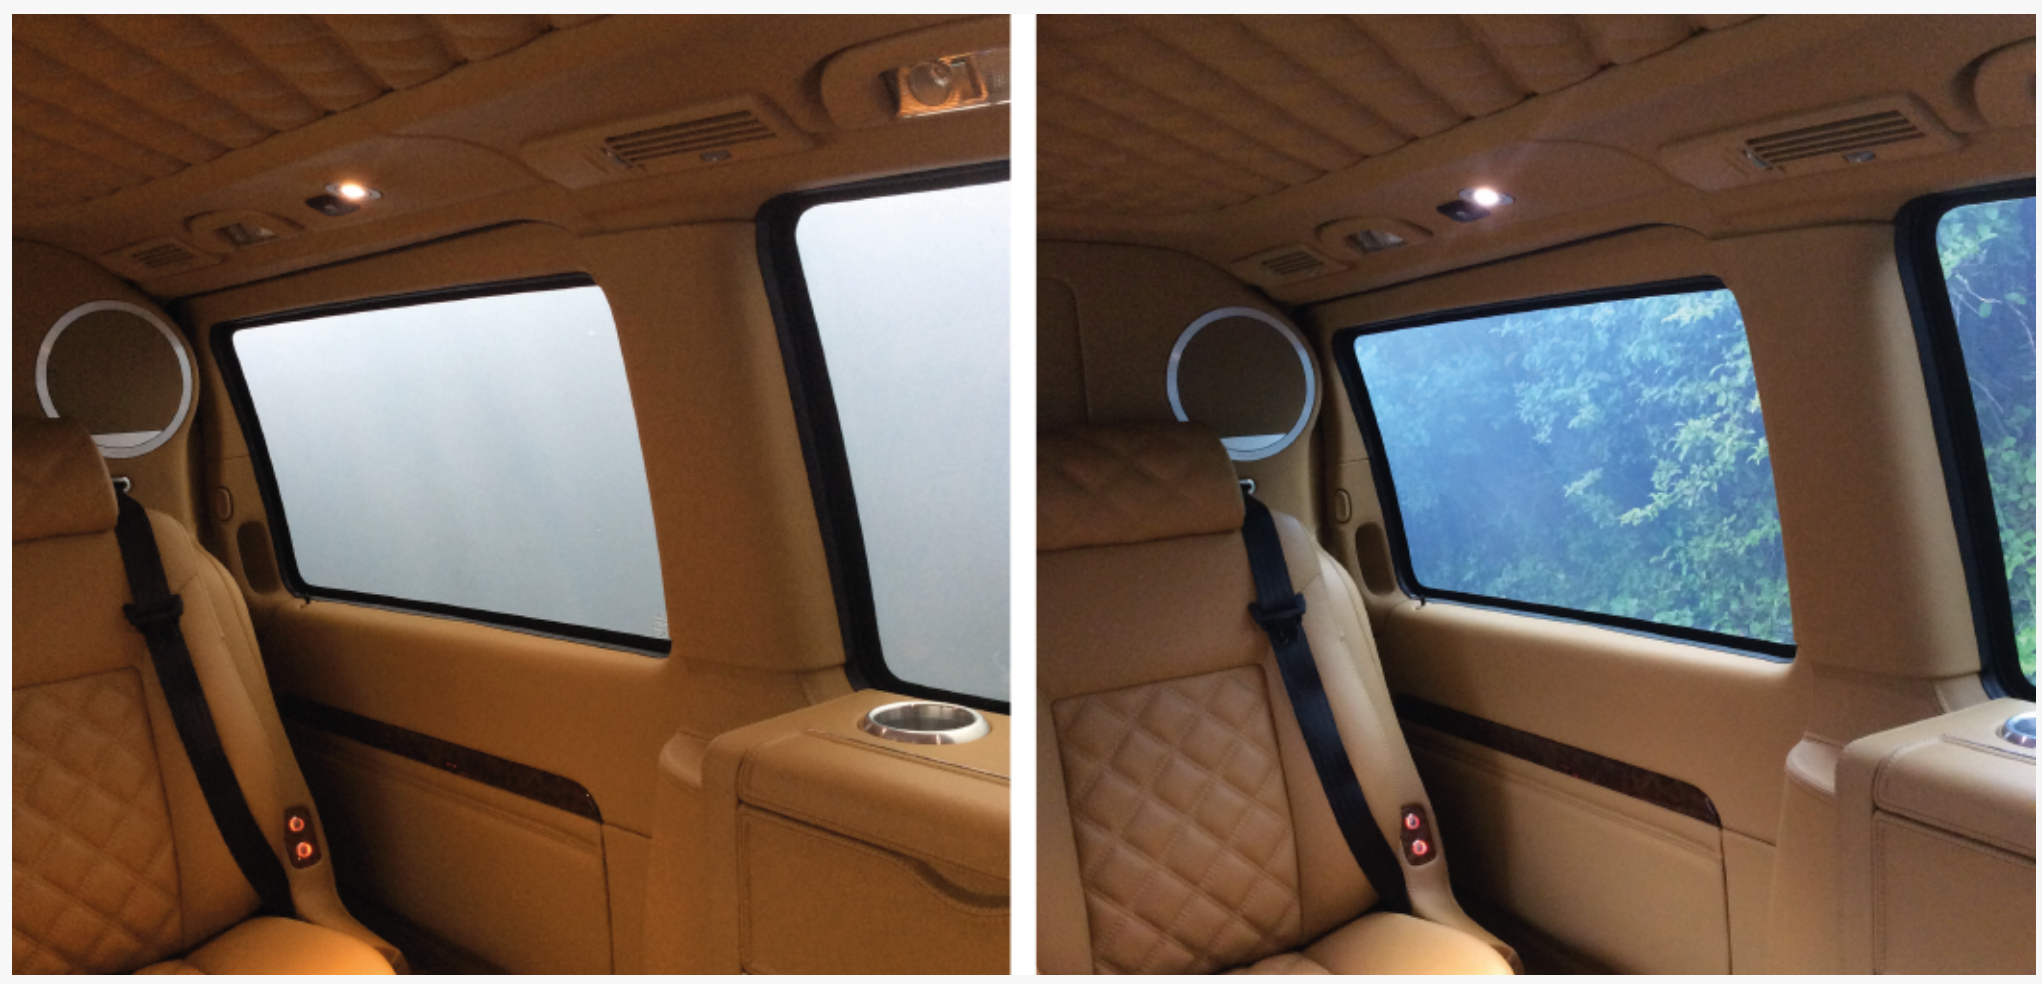 Smart glass windows inside a vehicle are shown side-by-side, image on the left has opaque windows, image on right has clear windows